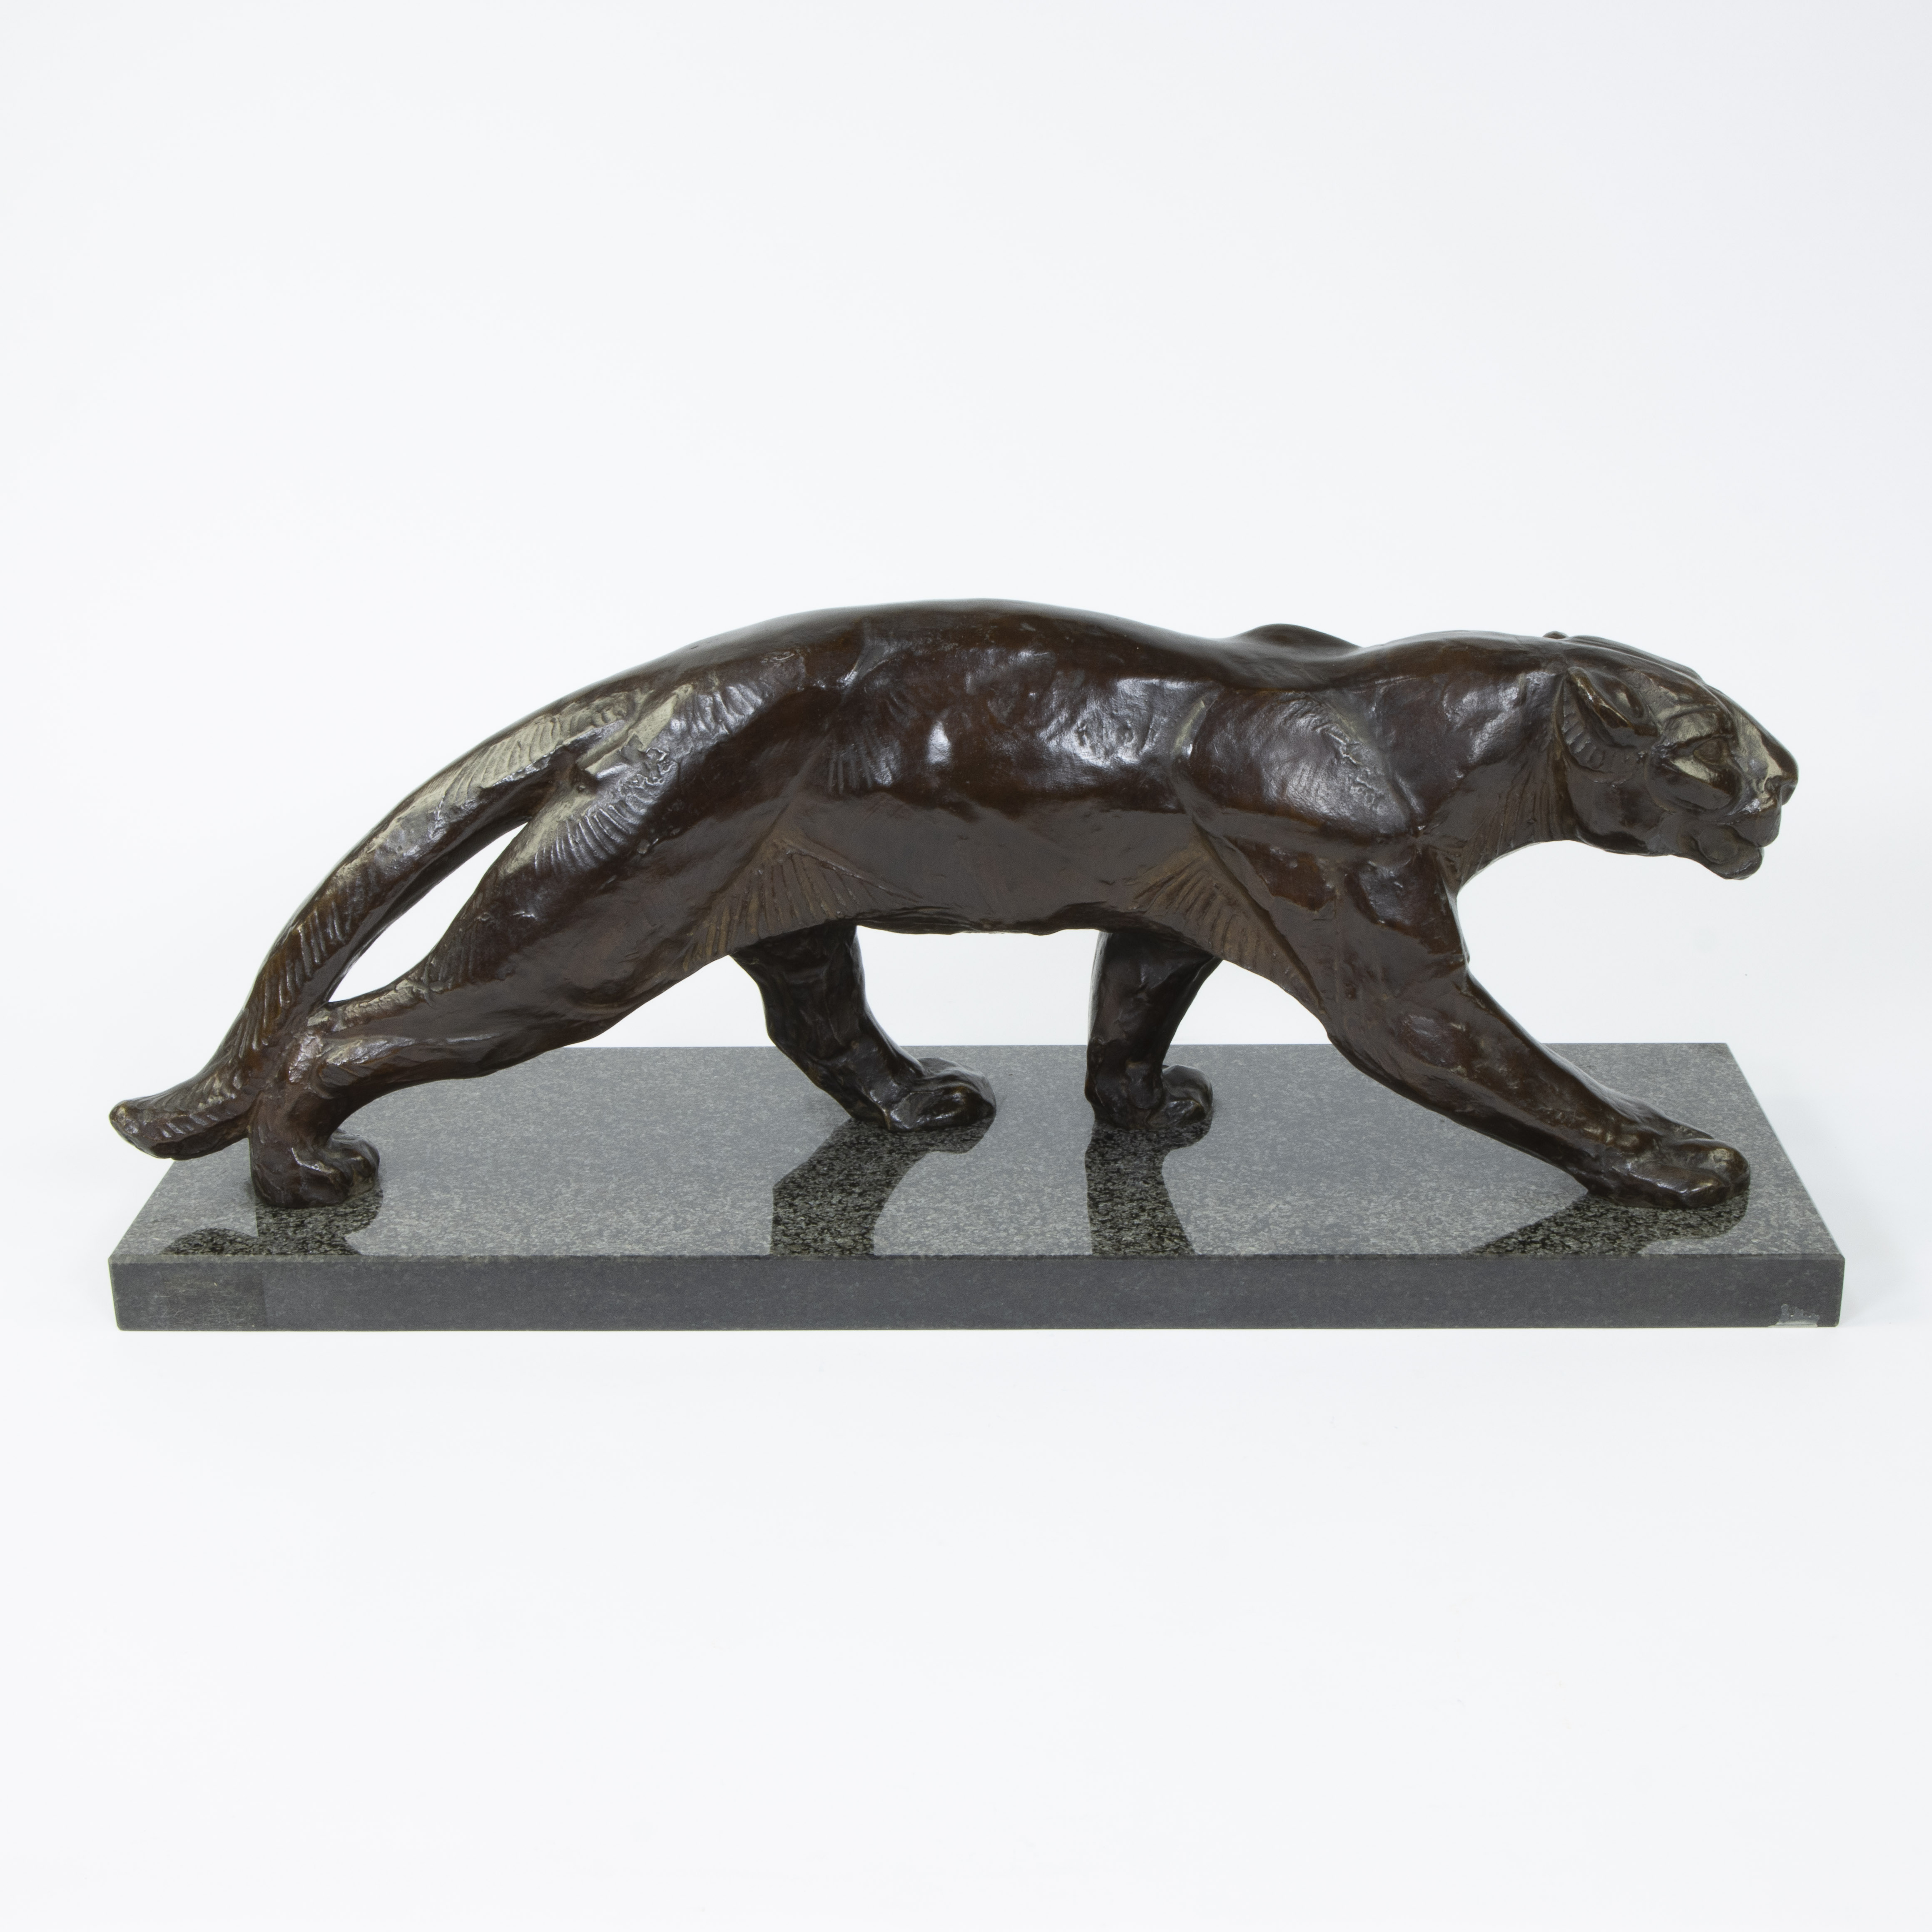 Bronze Art Deco panther on marble base, circa 1930s - Image 4 of 5